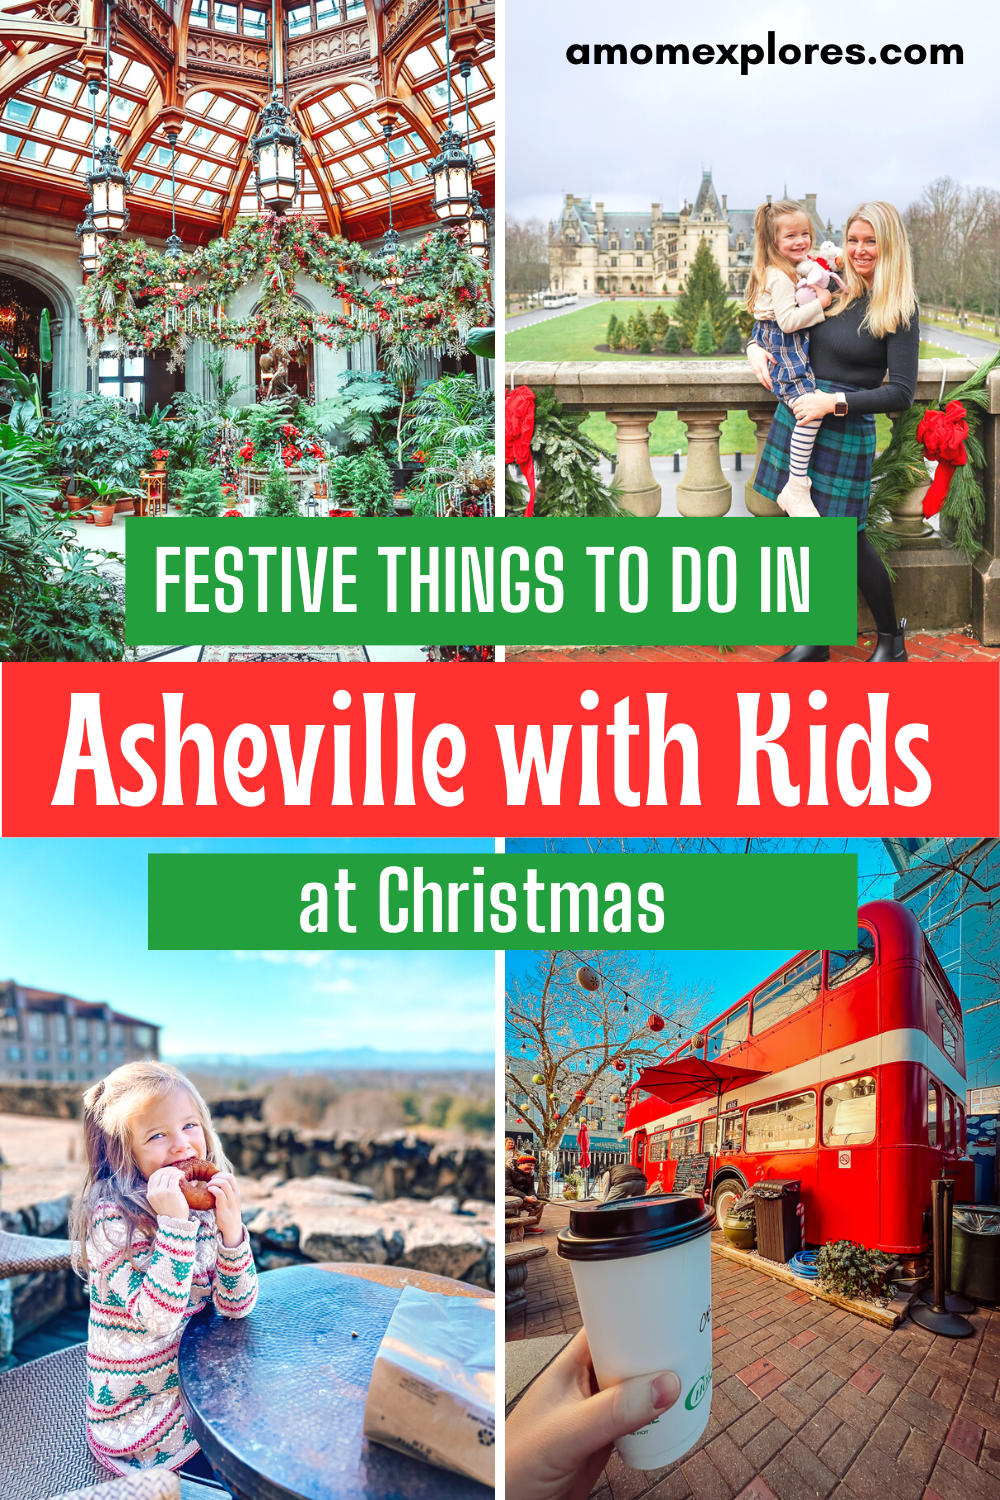 festive things to do in asheville with kids at Christmas.png